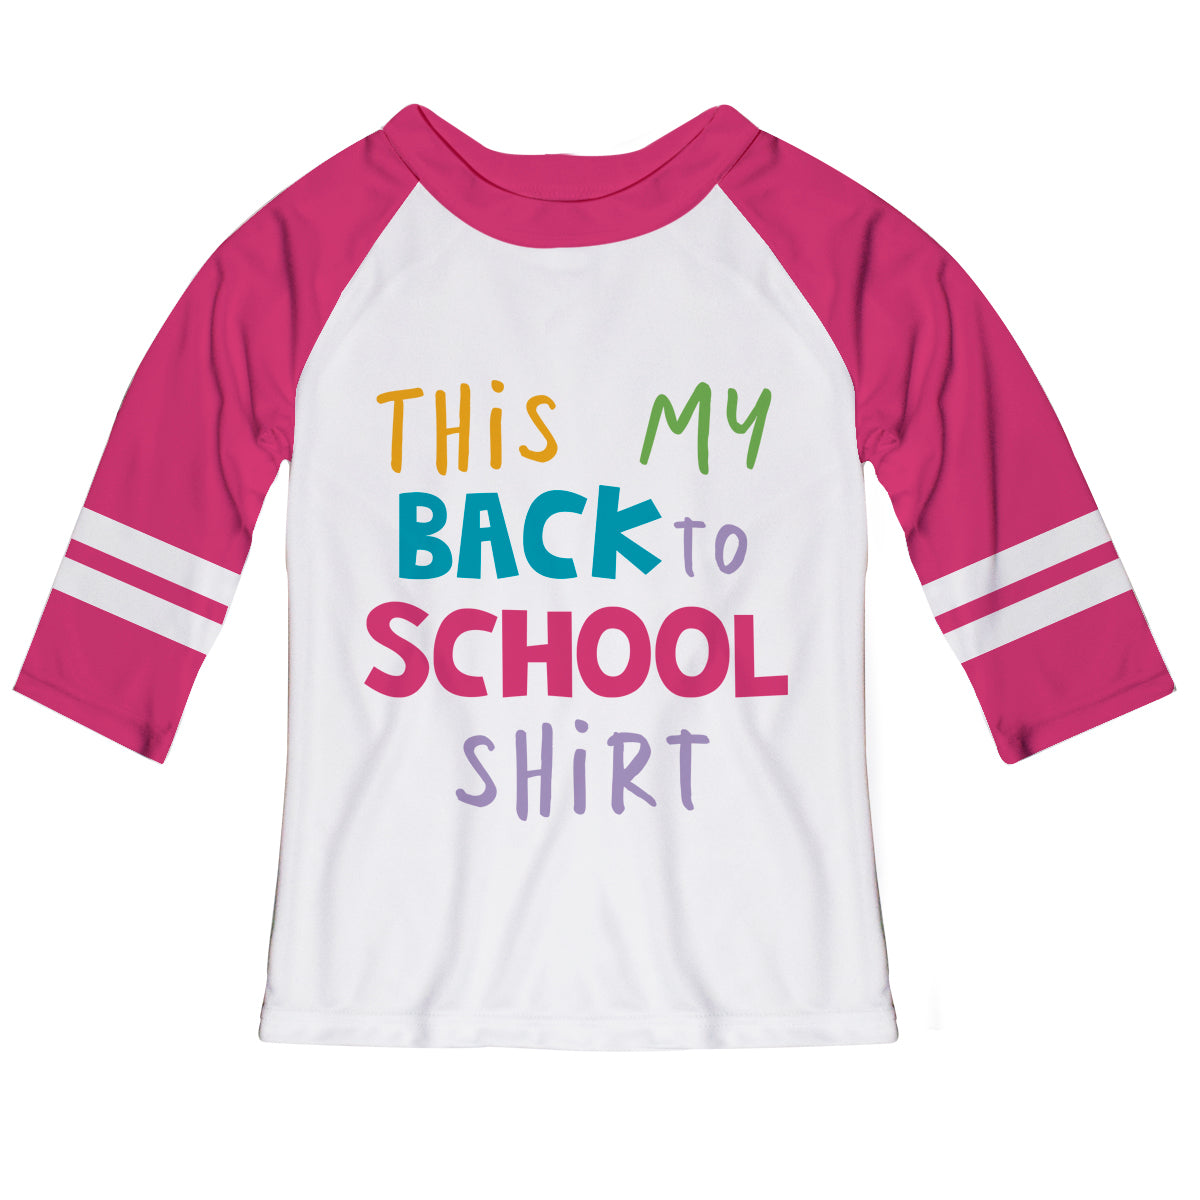 This My Back To School Shirt White And Hot Pink Raglan Tee Shirt - Wimziy&Co.